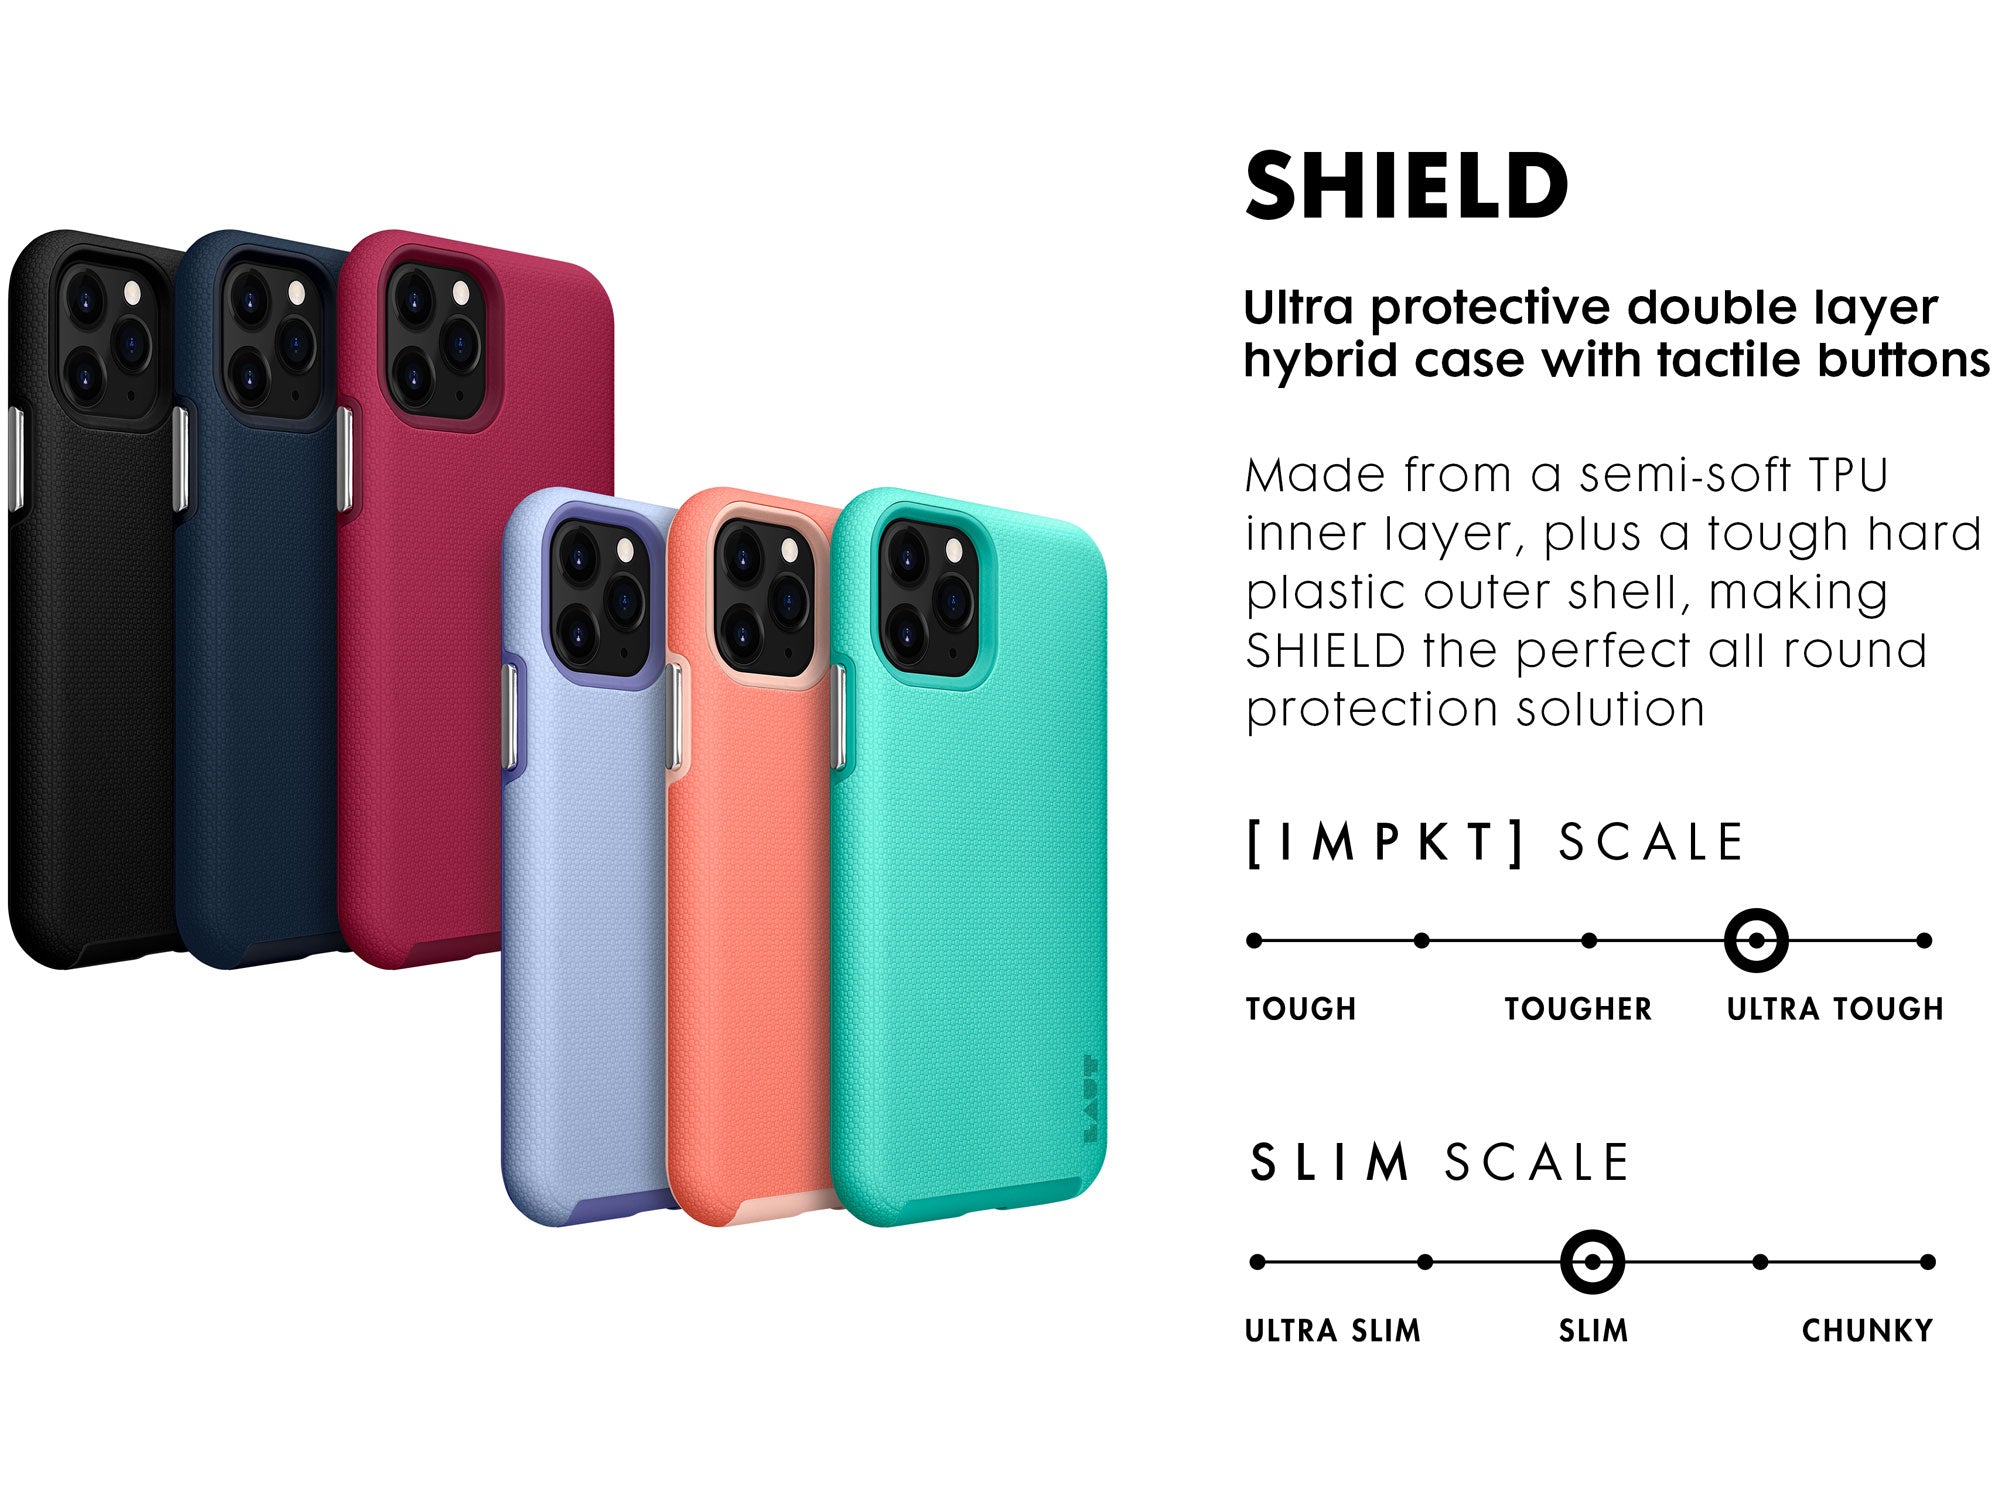 SHIELD for iPhone 11 series